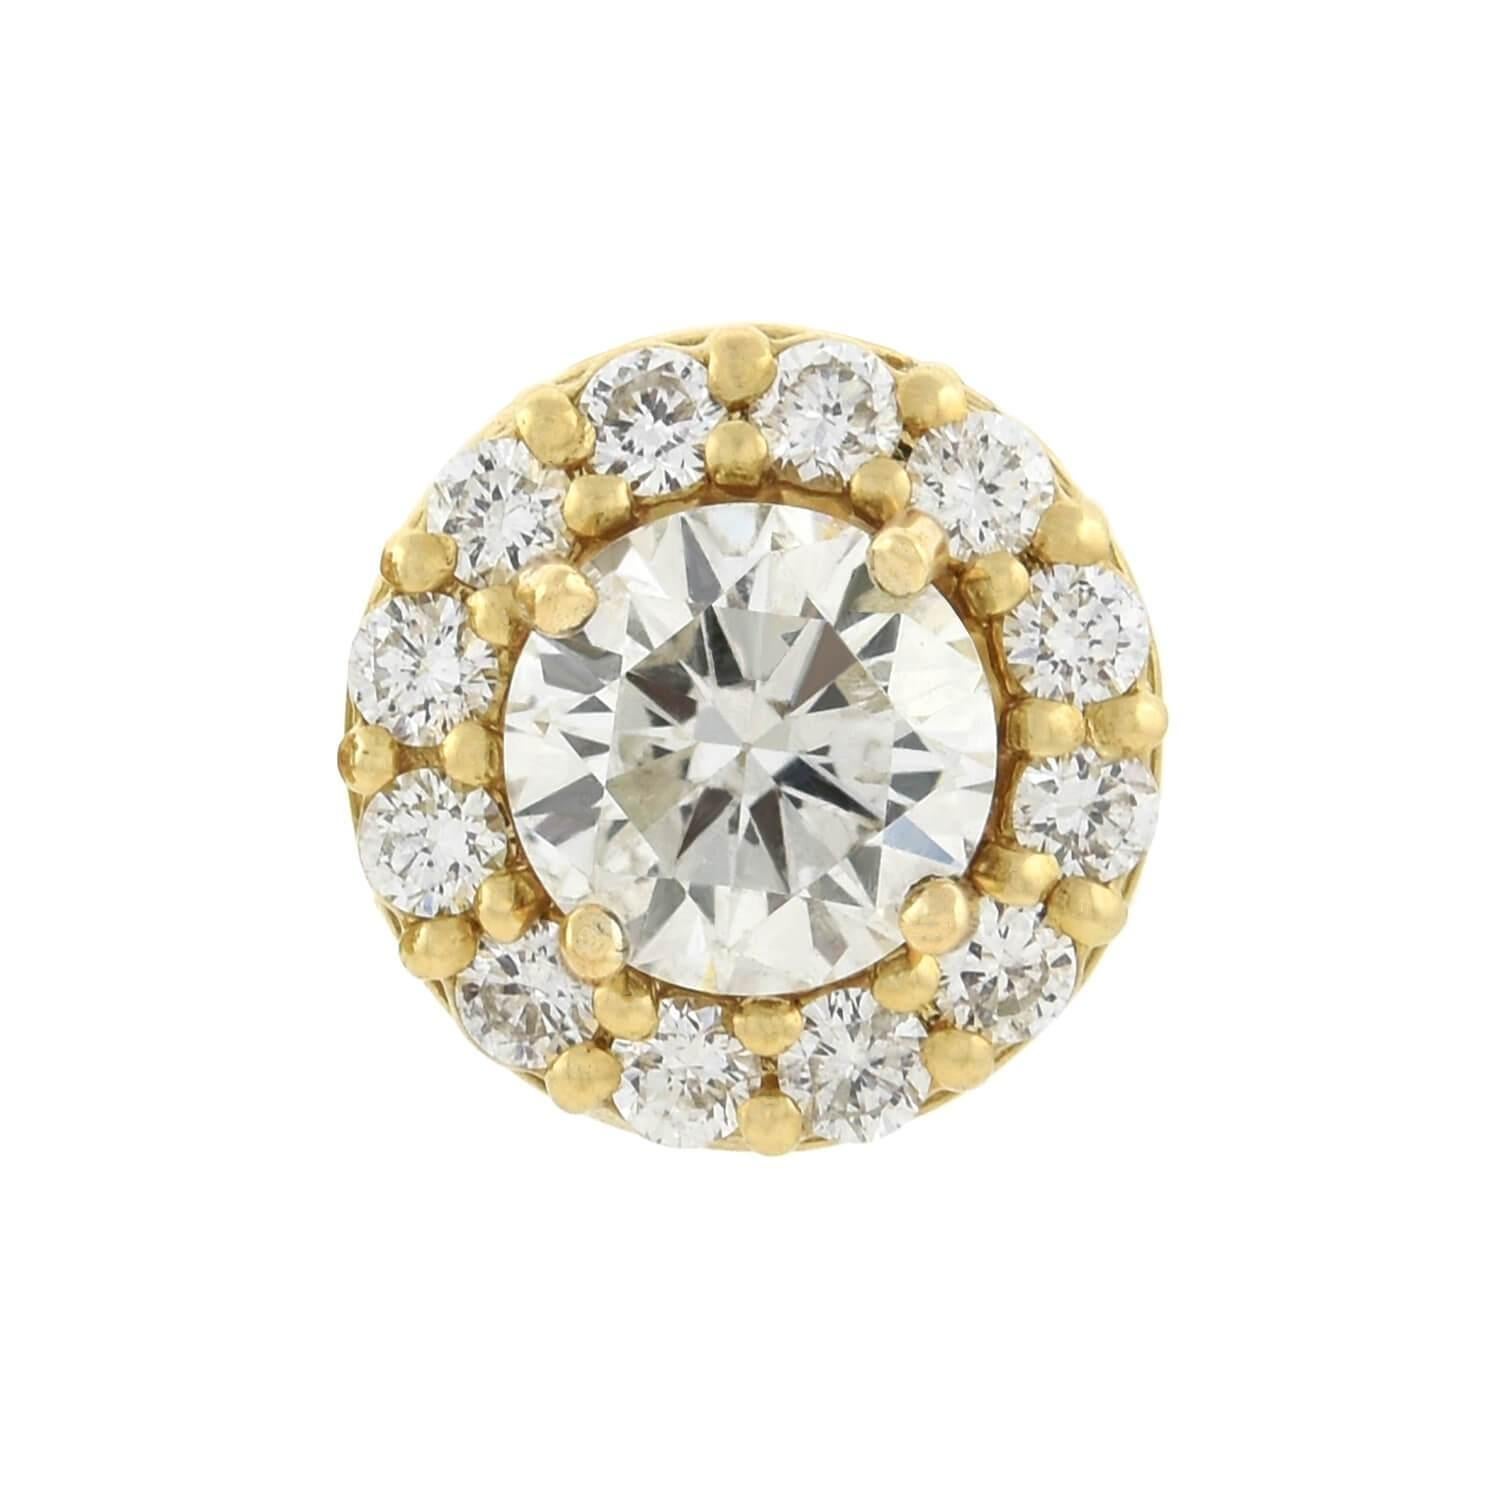 A stunning and versatile pair of Estate diamond earrings! Crafted in 14kt yellow gold, each stud style earring adorns a single Round Brilliant Cut diamond at the center. The prong set stones weigh approximately 0.70ct each, exhibiting H/I color and